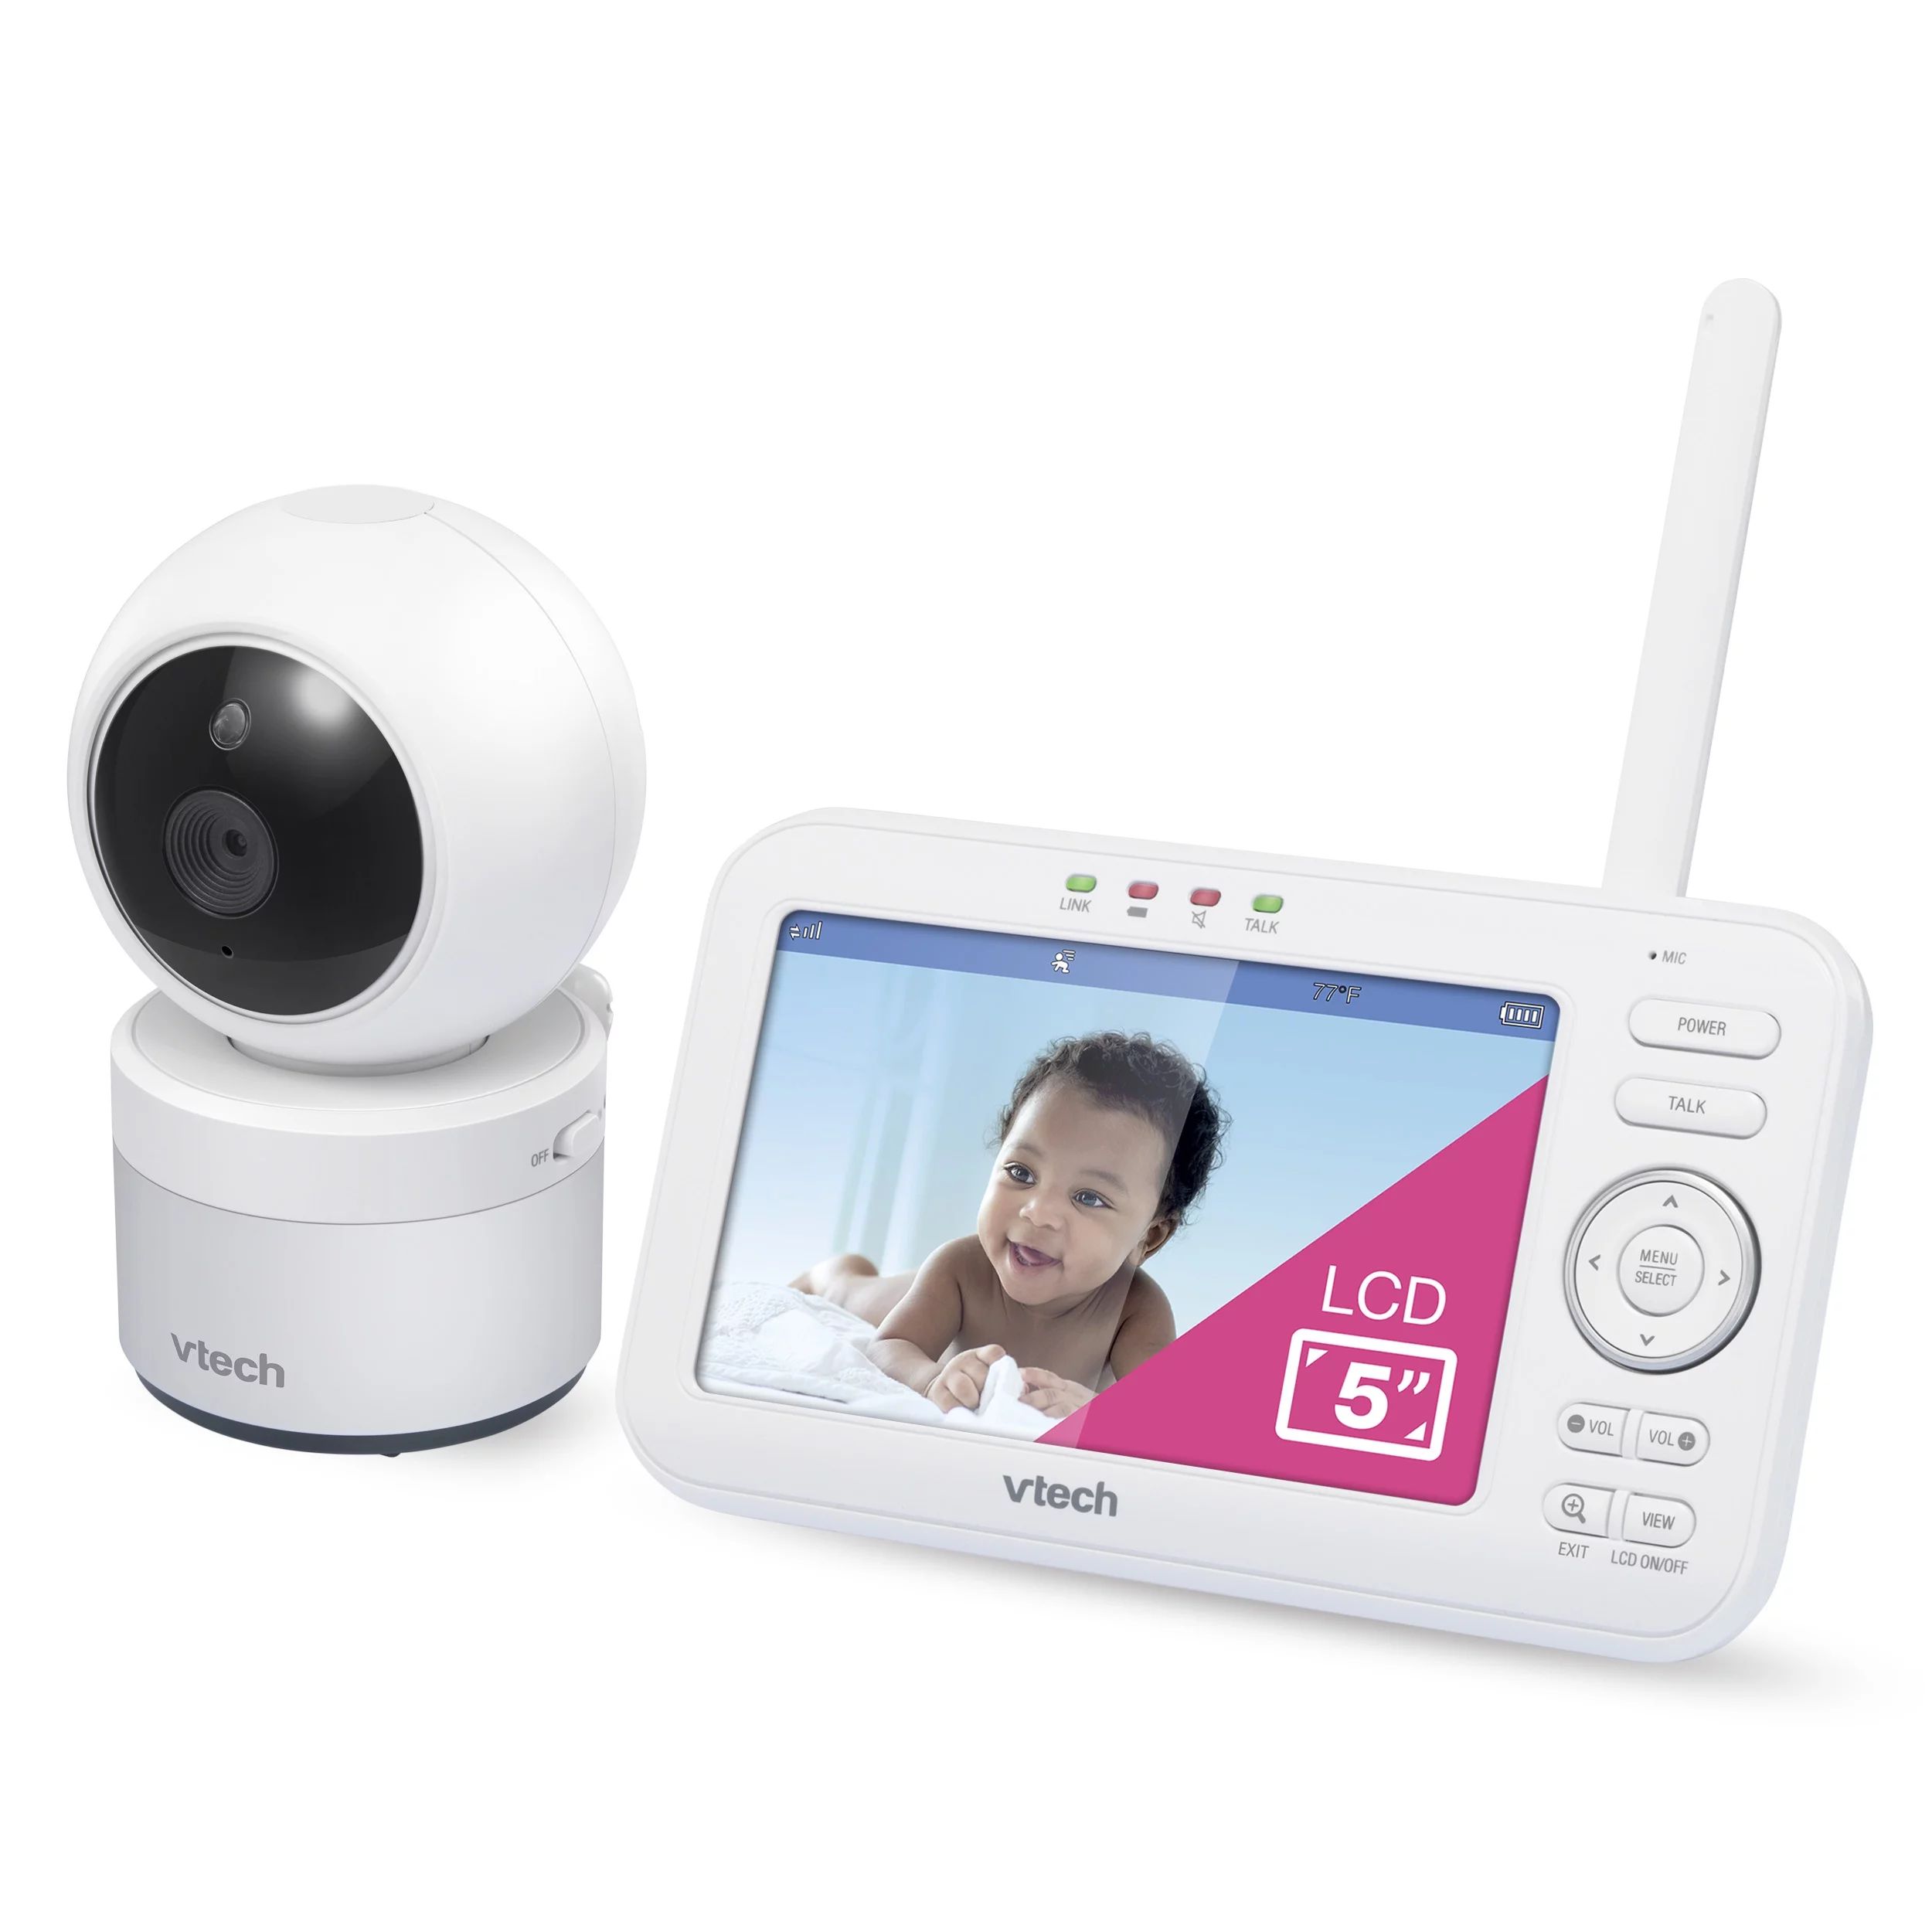 VTech VM5263 5" Digitial Video Baby Monitor with Pan and Tilt and Night Light | Walmart (US)